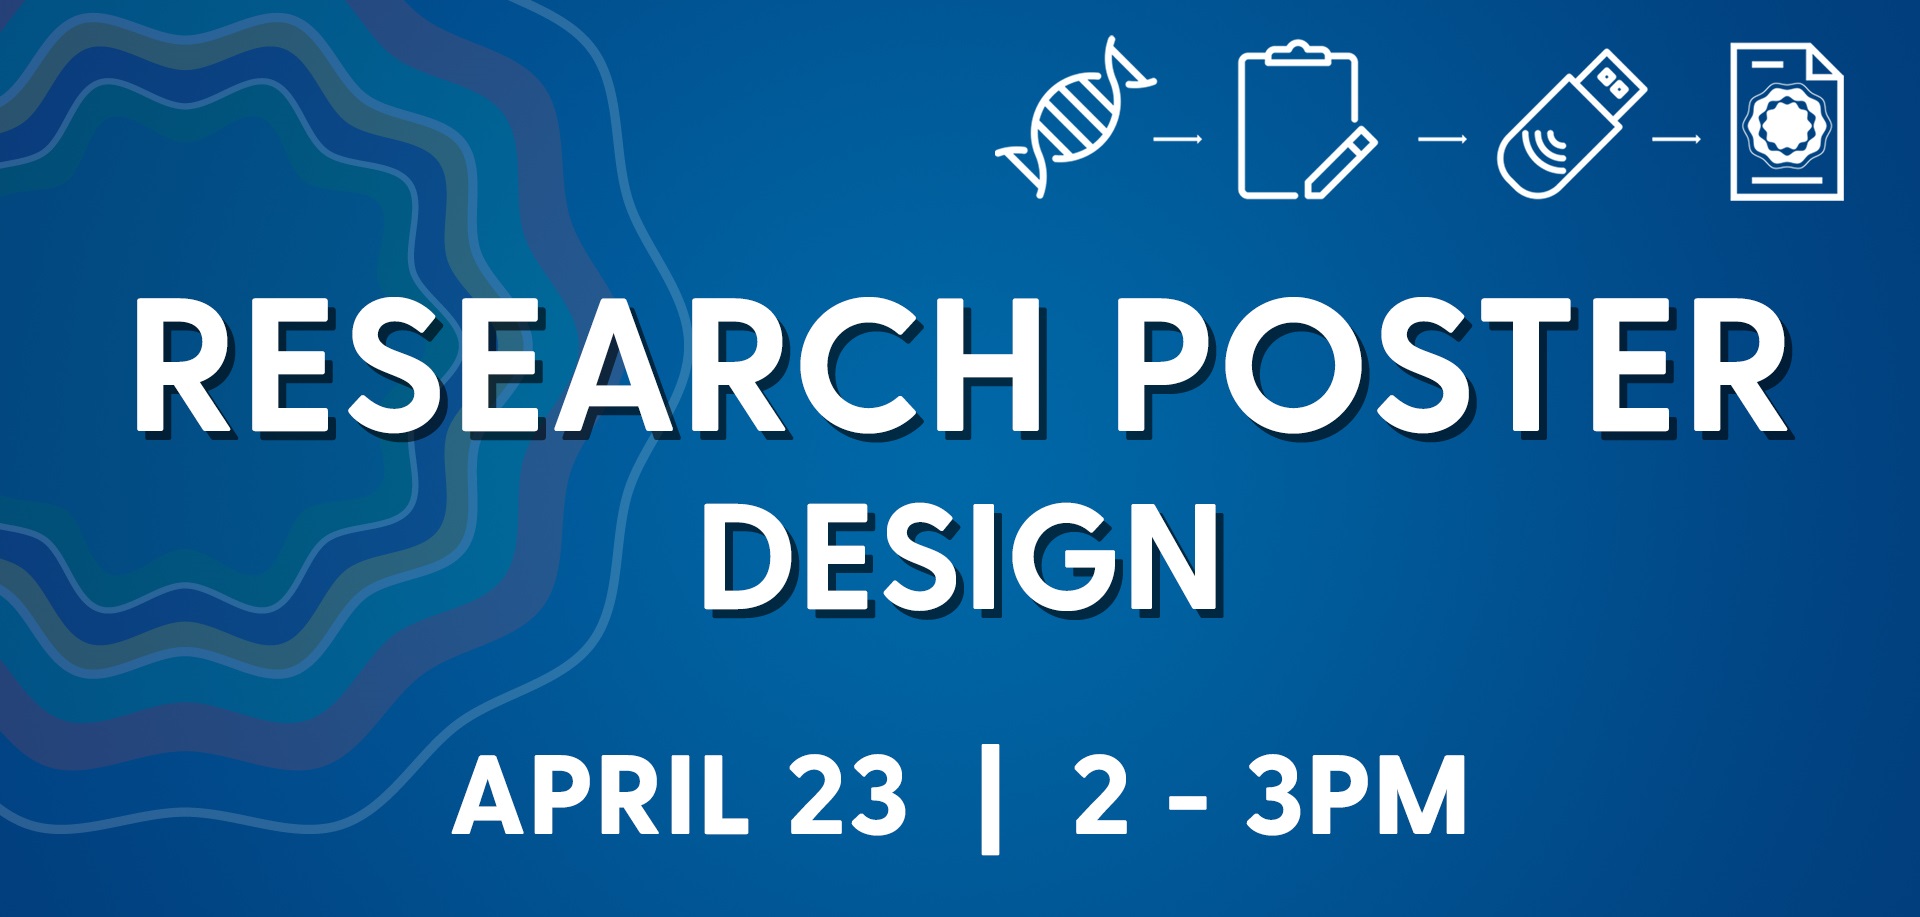 Research Poster Design